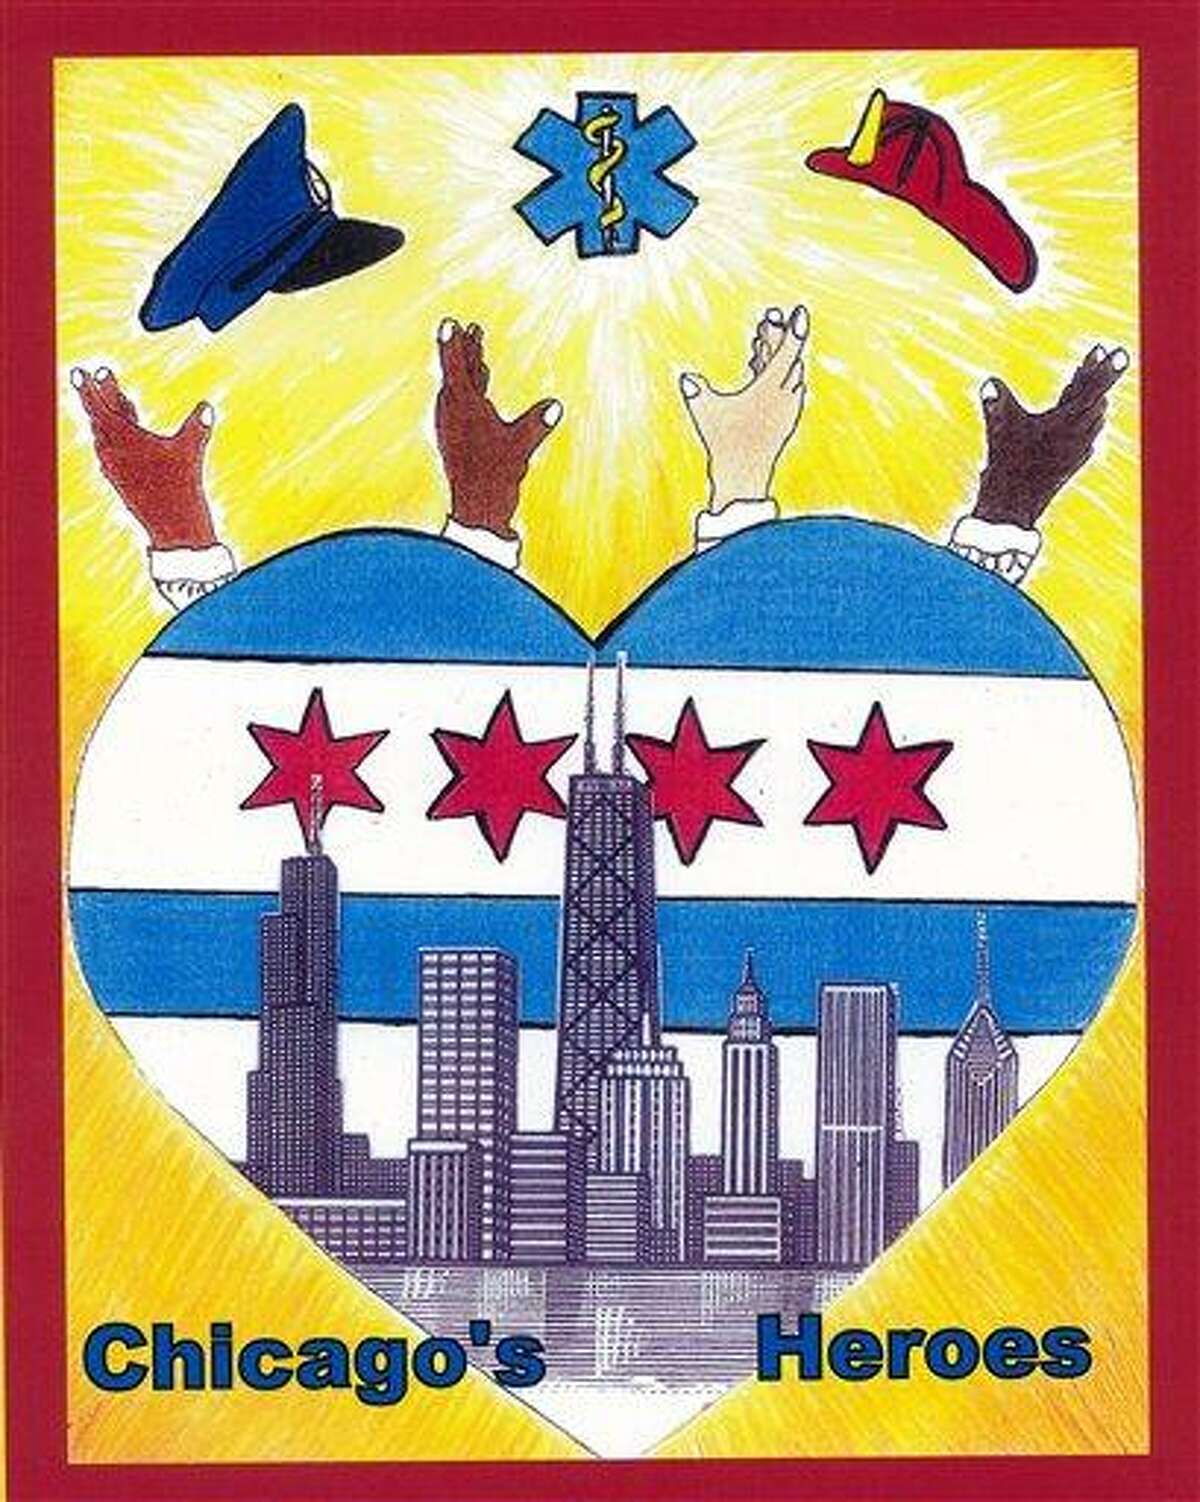 This photo taken Nov. 28, 2011 shows the winning design for the 2012-13 city of Chicago vehicle sticker that was axed Wednesday by Chicago City Clerk Susana Mendoza contending some may believe it depicts street gang signs. At the time his design was chosen winner of the city vehicle sticker student-art contest, 15-year-old Herbert Pulgar, said it was meant to honor city firefighters, paramedics and police. It includes the city's skyline inside a heart, with hands pointing toward a police hat, firefighter helmet and paramedic symbol. Officials sat the clerk's office began receiving calls Tuesday, after a blogger identified the hands depicted on the sticker as symbols flashed by members of a street gang. Associated Press